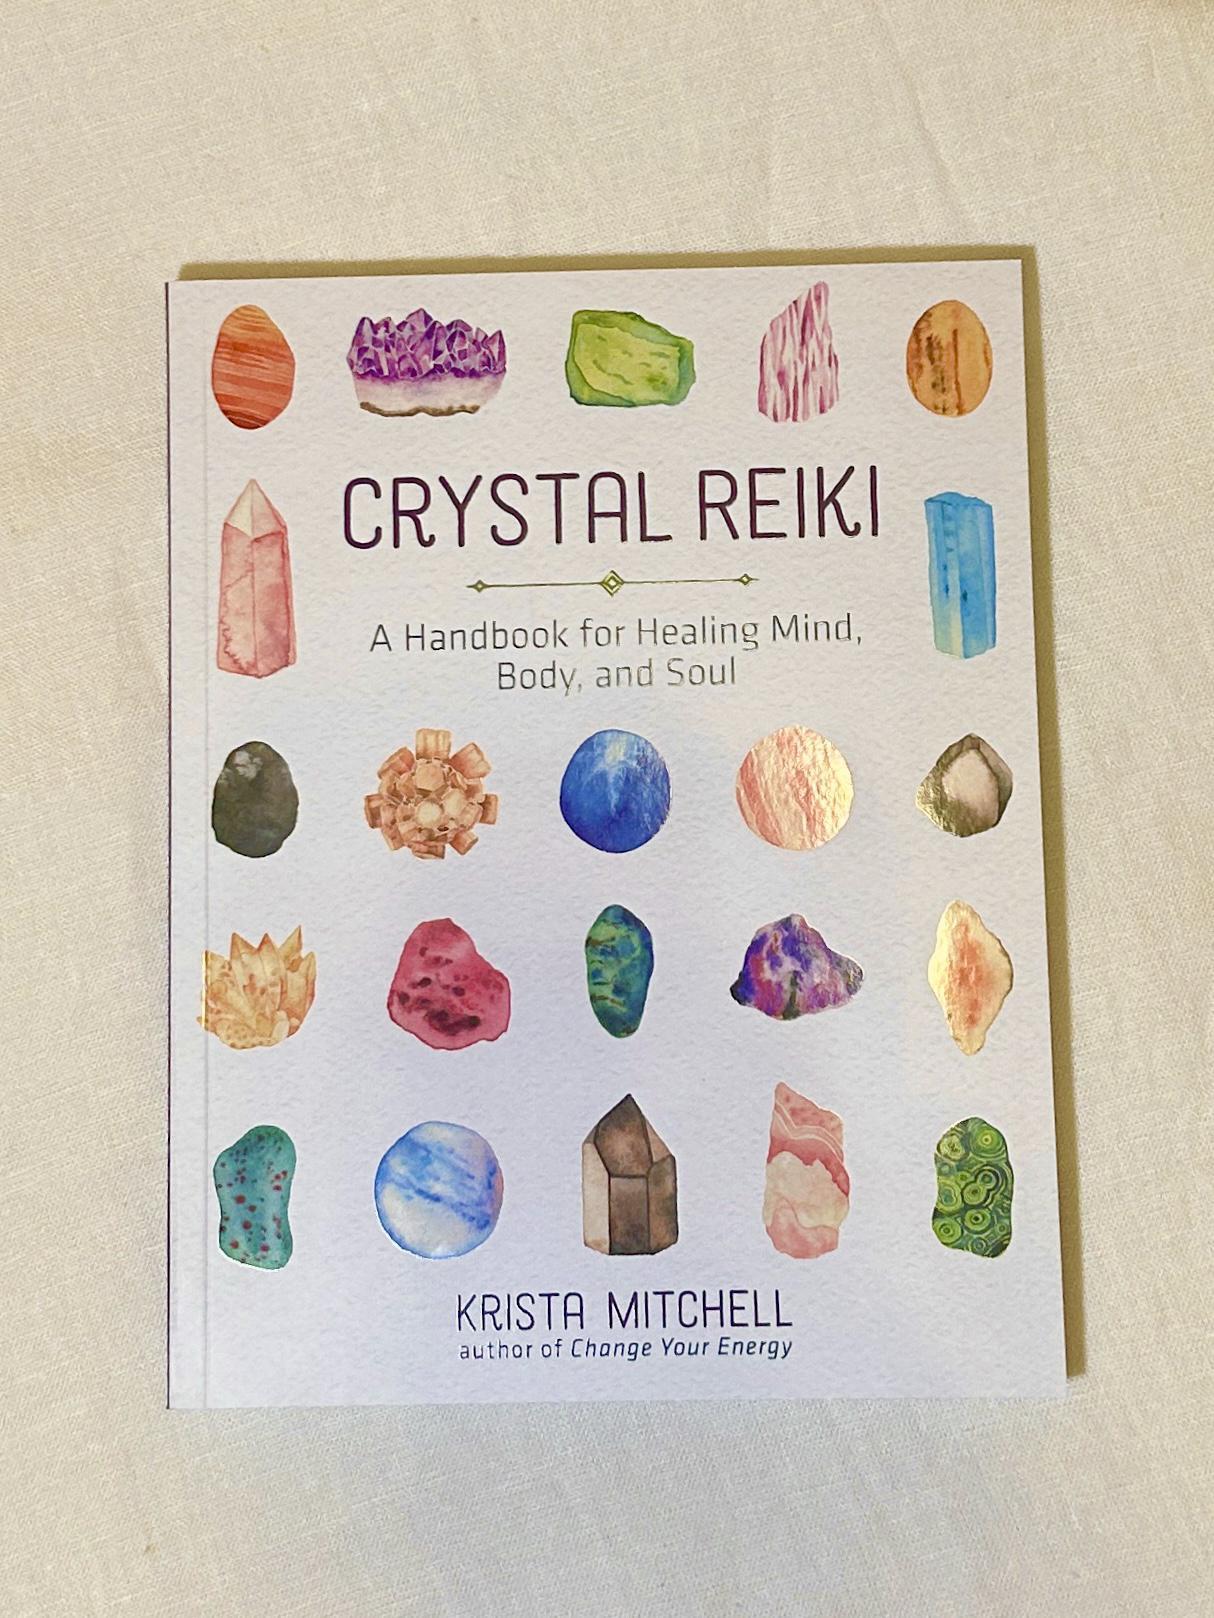 Crystal Reiki: A Handbook for Healing Mind, Body, and Soul By Krista Mitchell. Known as the “Rock Whisperer,” Krista N. Mitchell has created an informative handbook for professional Reiki practitioners who would like to learn how to combine crystal healing with their Reiki sessions.